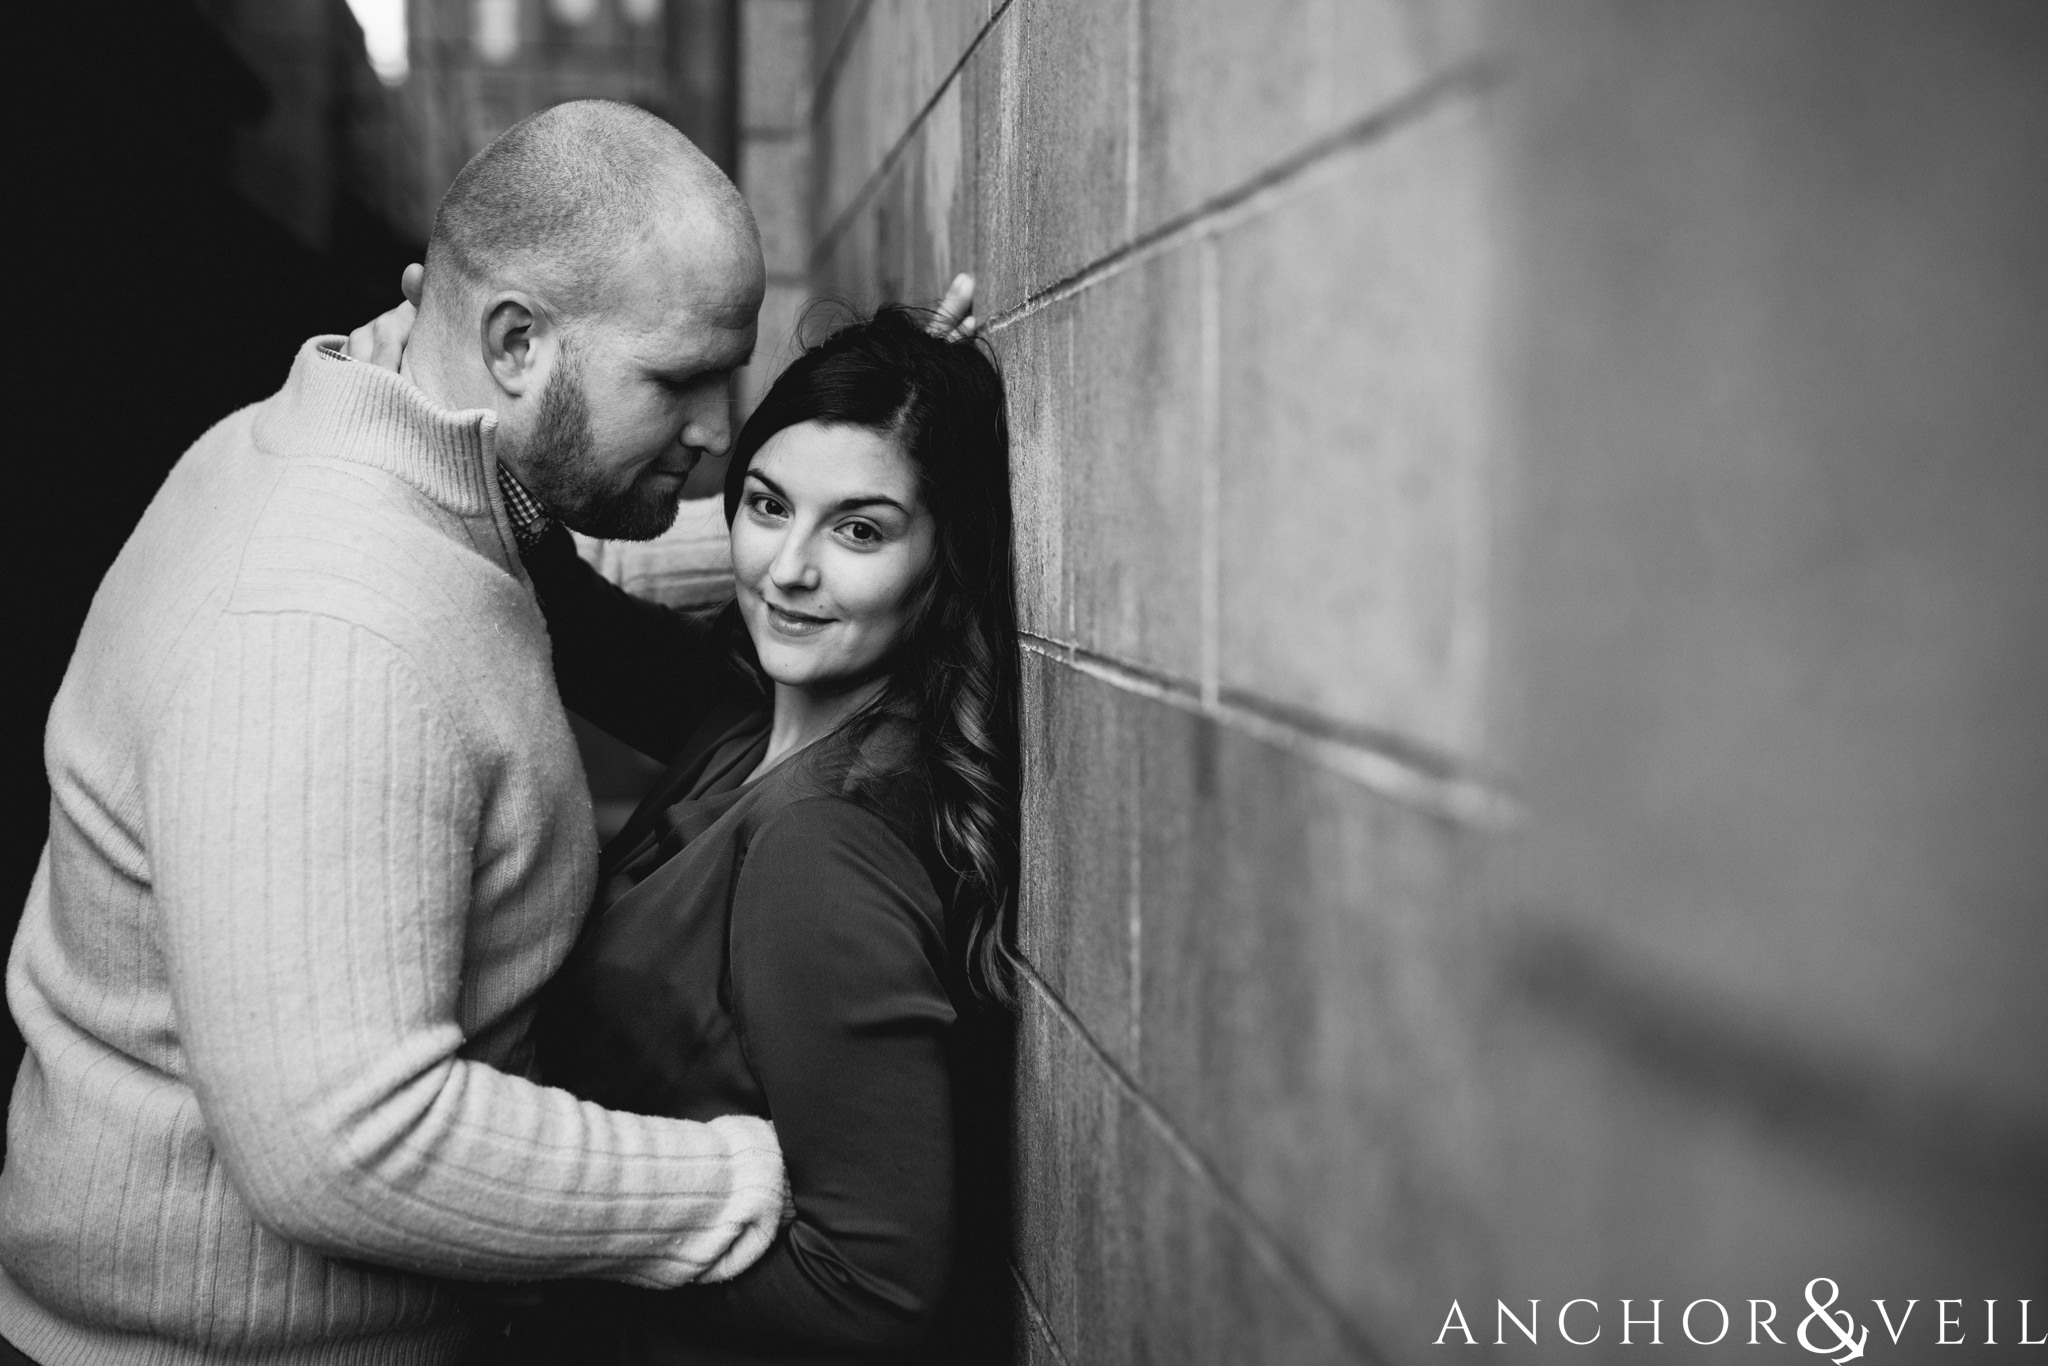 leaning against the wall During their Dumbo Brooklyn New York engagement session